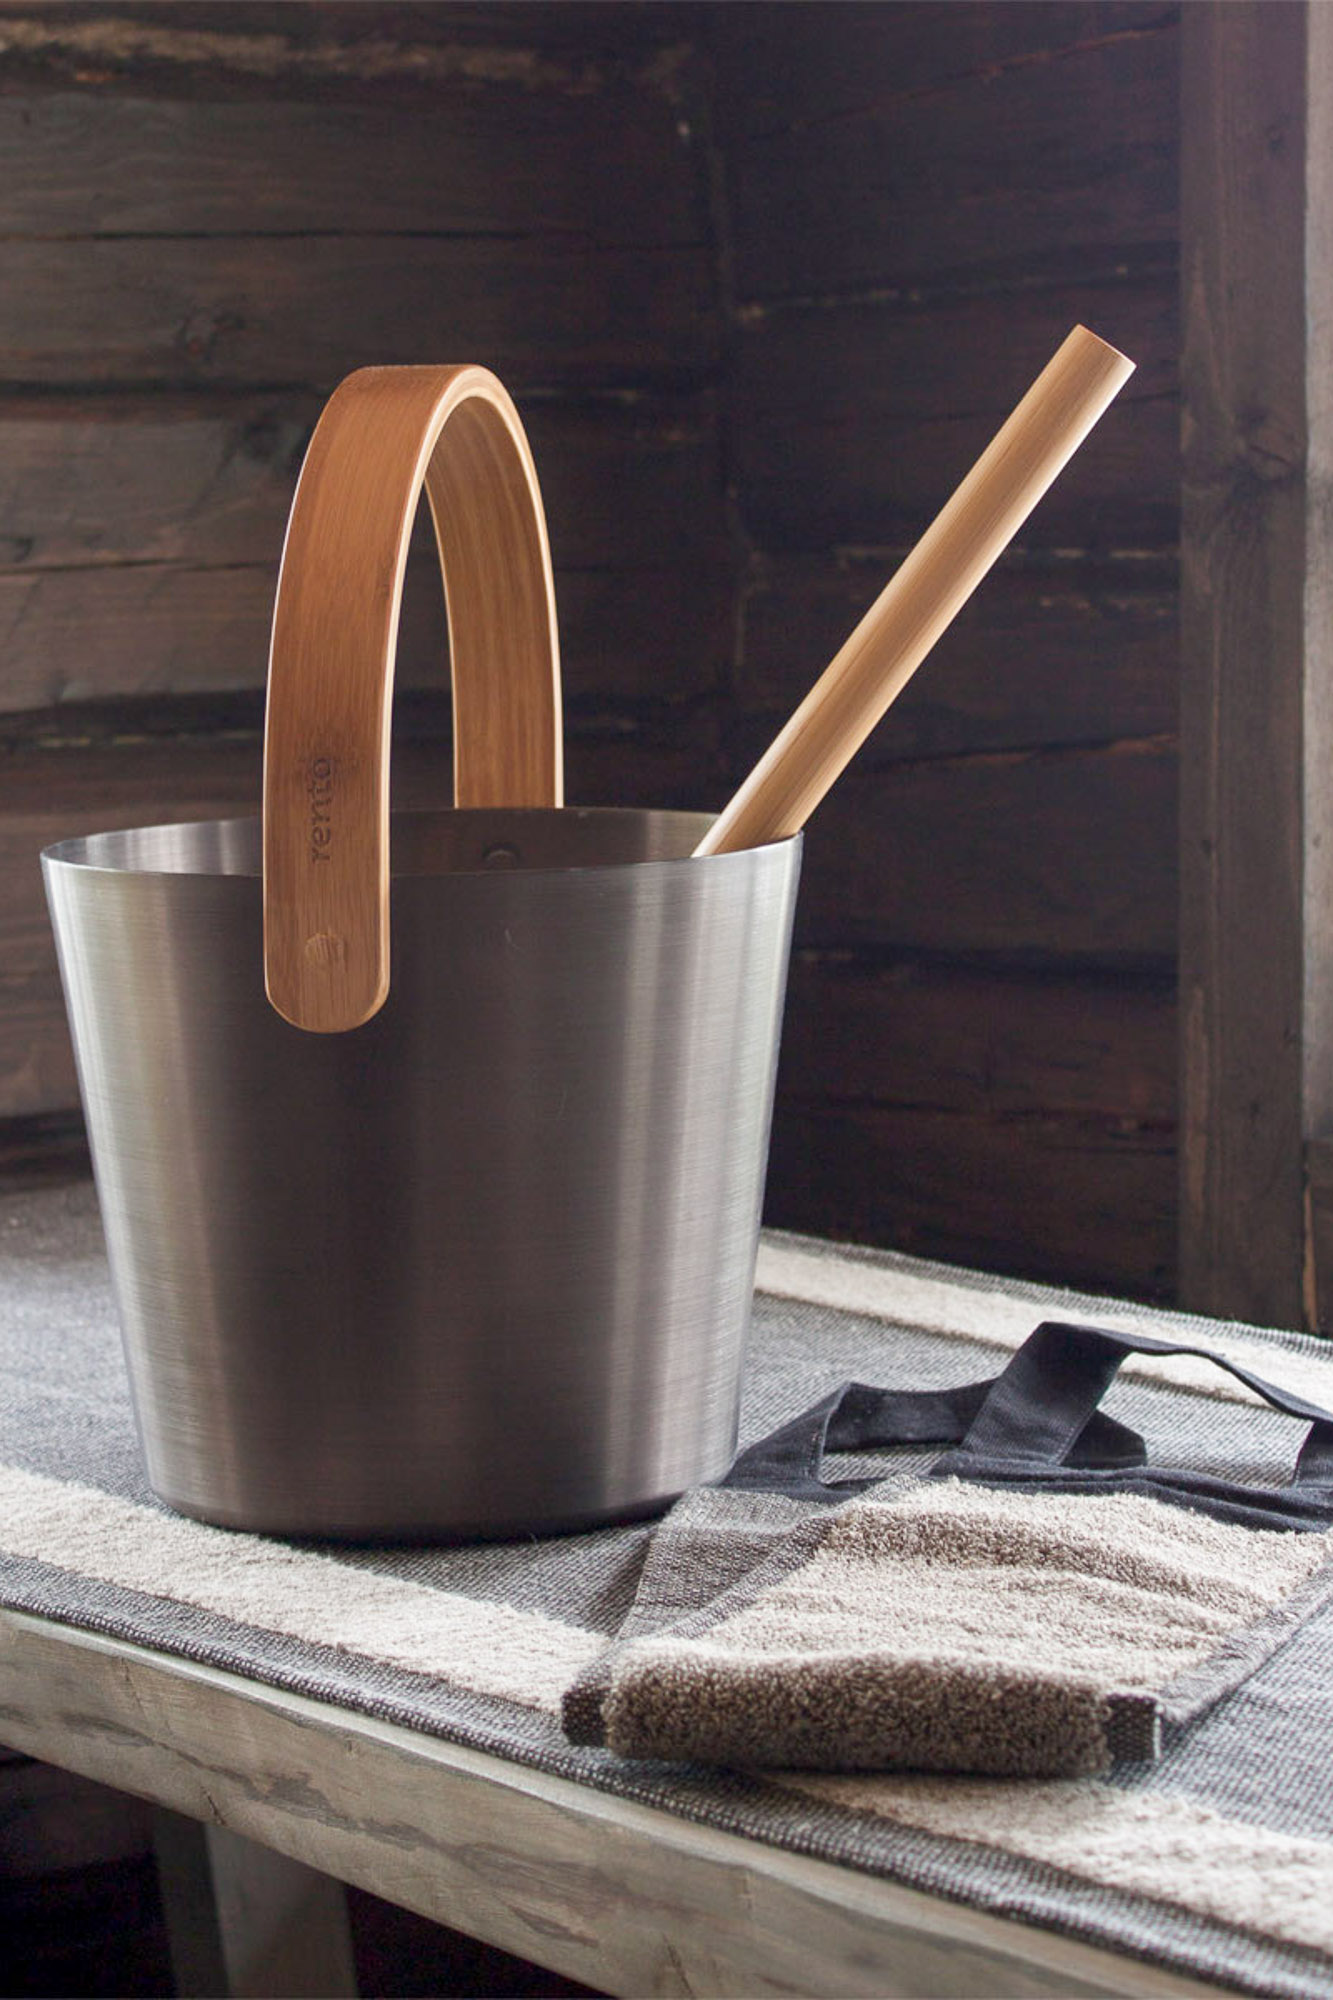 nomad cabin rento metal and wood sauna bucket and ladle on bench